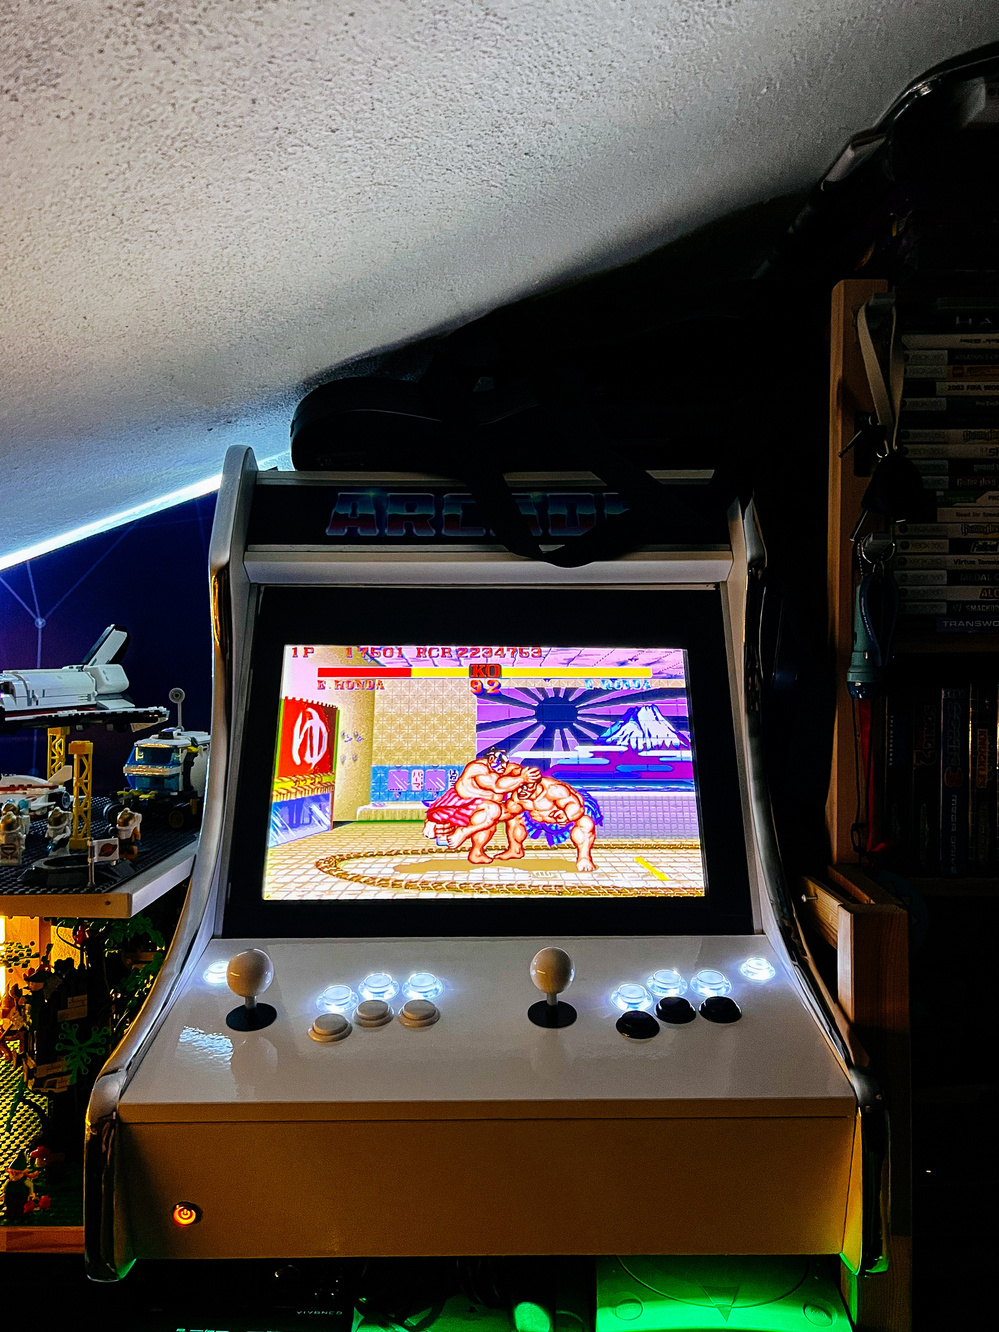 An arcade machine with the game &lsquo;Street Fighter II&rsquo; on the screen, set in a room with ambient lighting and shelves of books and Lego models.